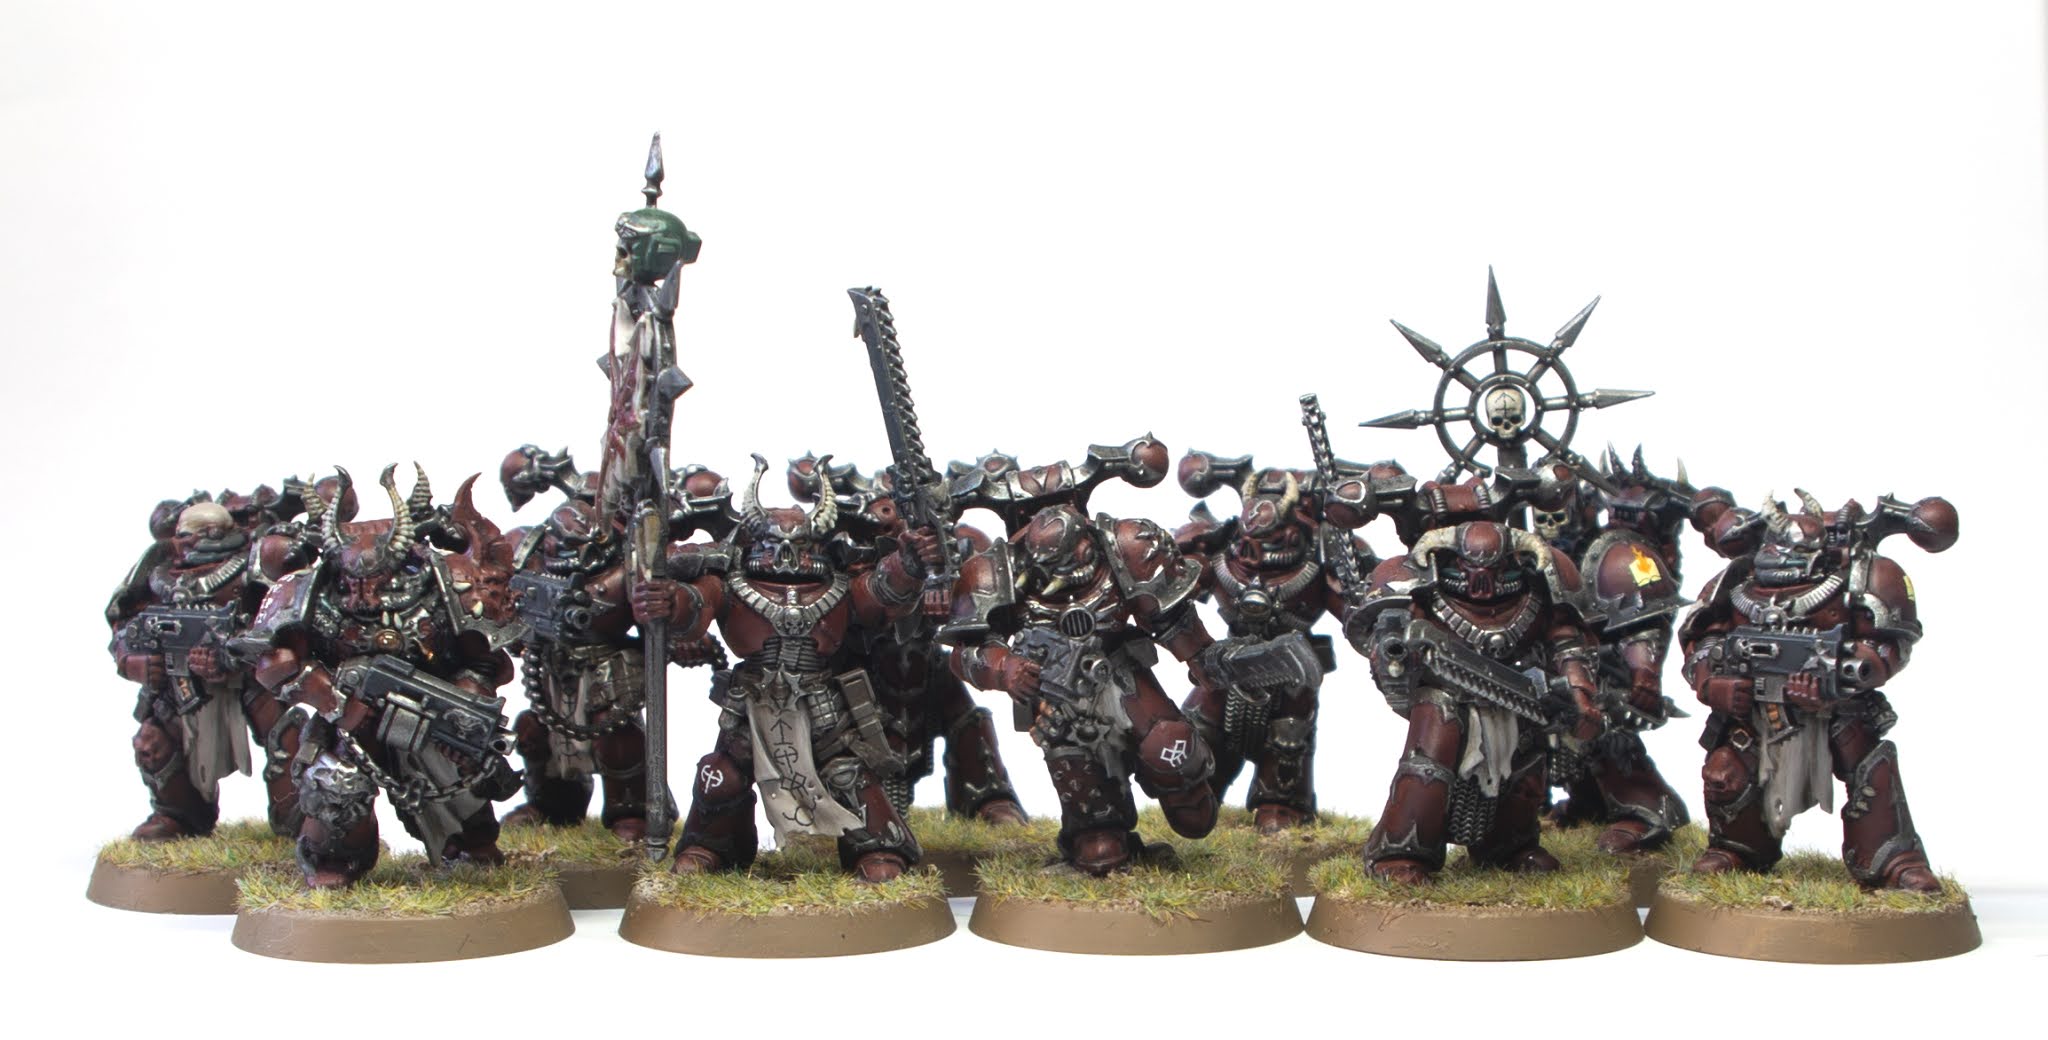 Do all word bearers serve Chaos Undivided in modern 40k, or are there  smaller warbands that exclusively serve one god? - Quora